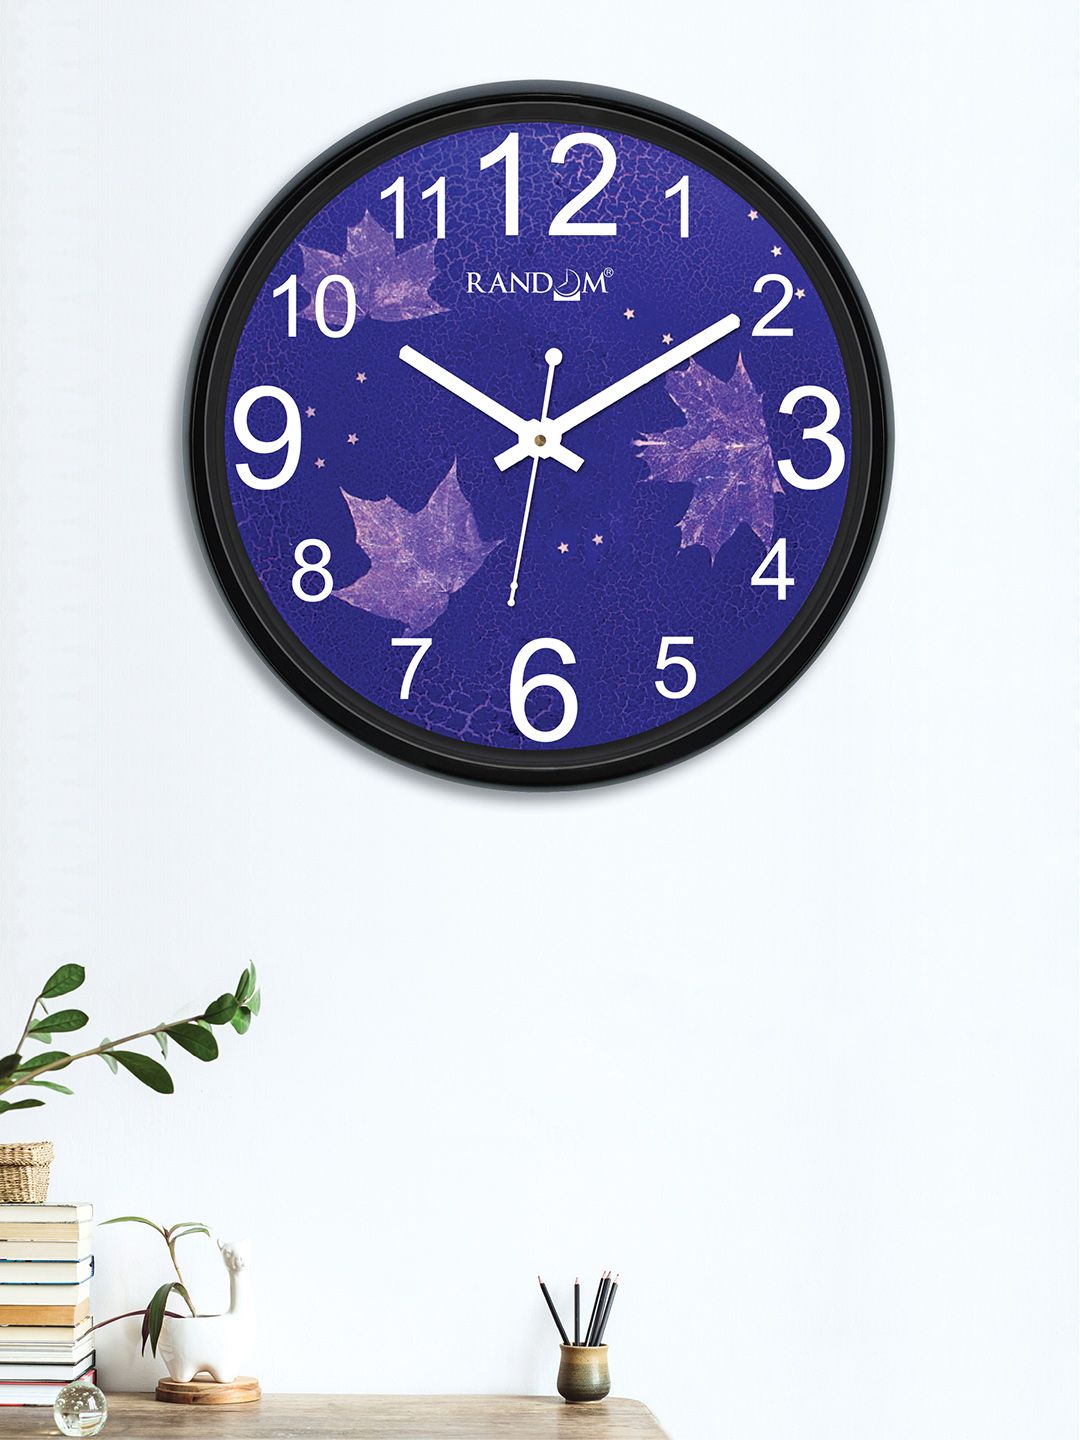 RANDOM Violet Round Printed 30 cm Analogue Wall Clock Price in India